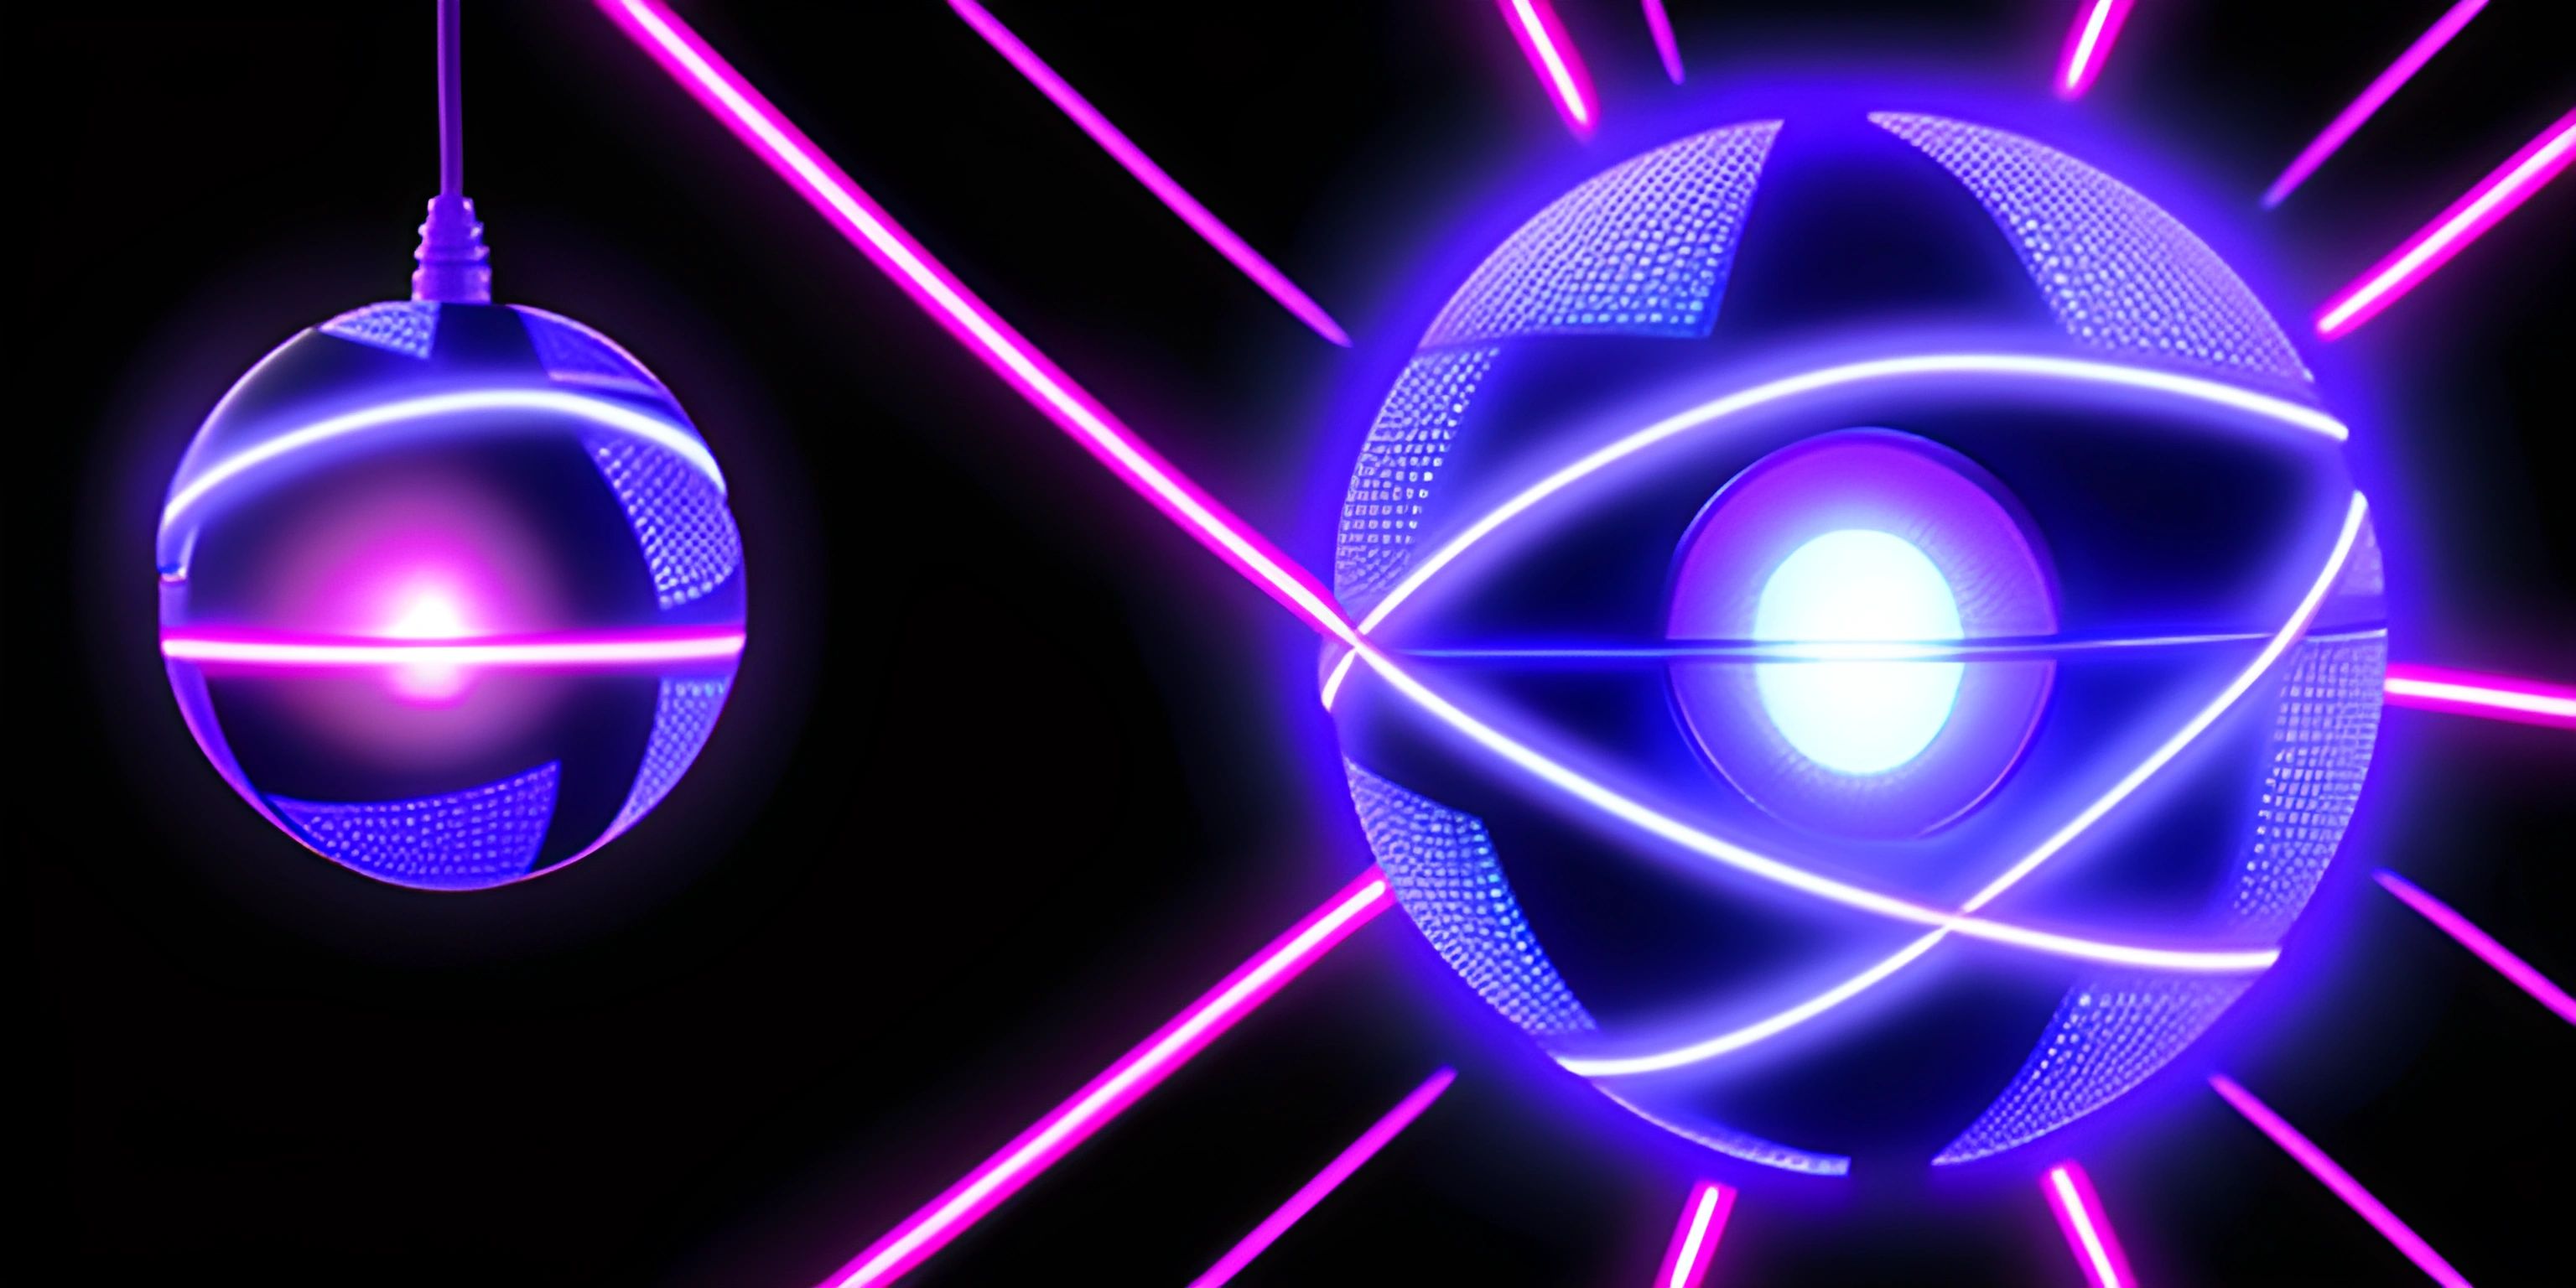 the image shows neon lights inside the sphere shape with two lamps in the background and the light from behind